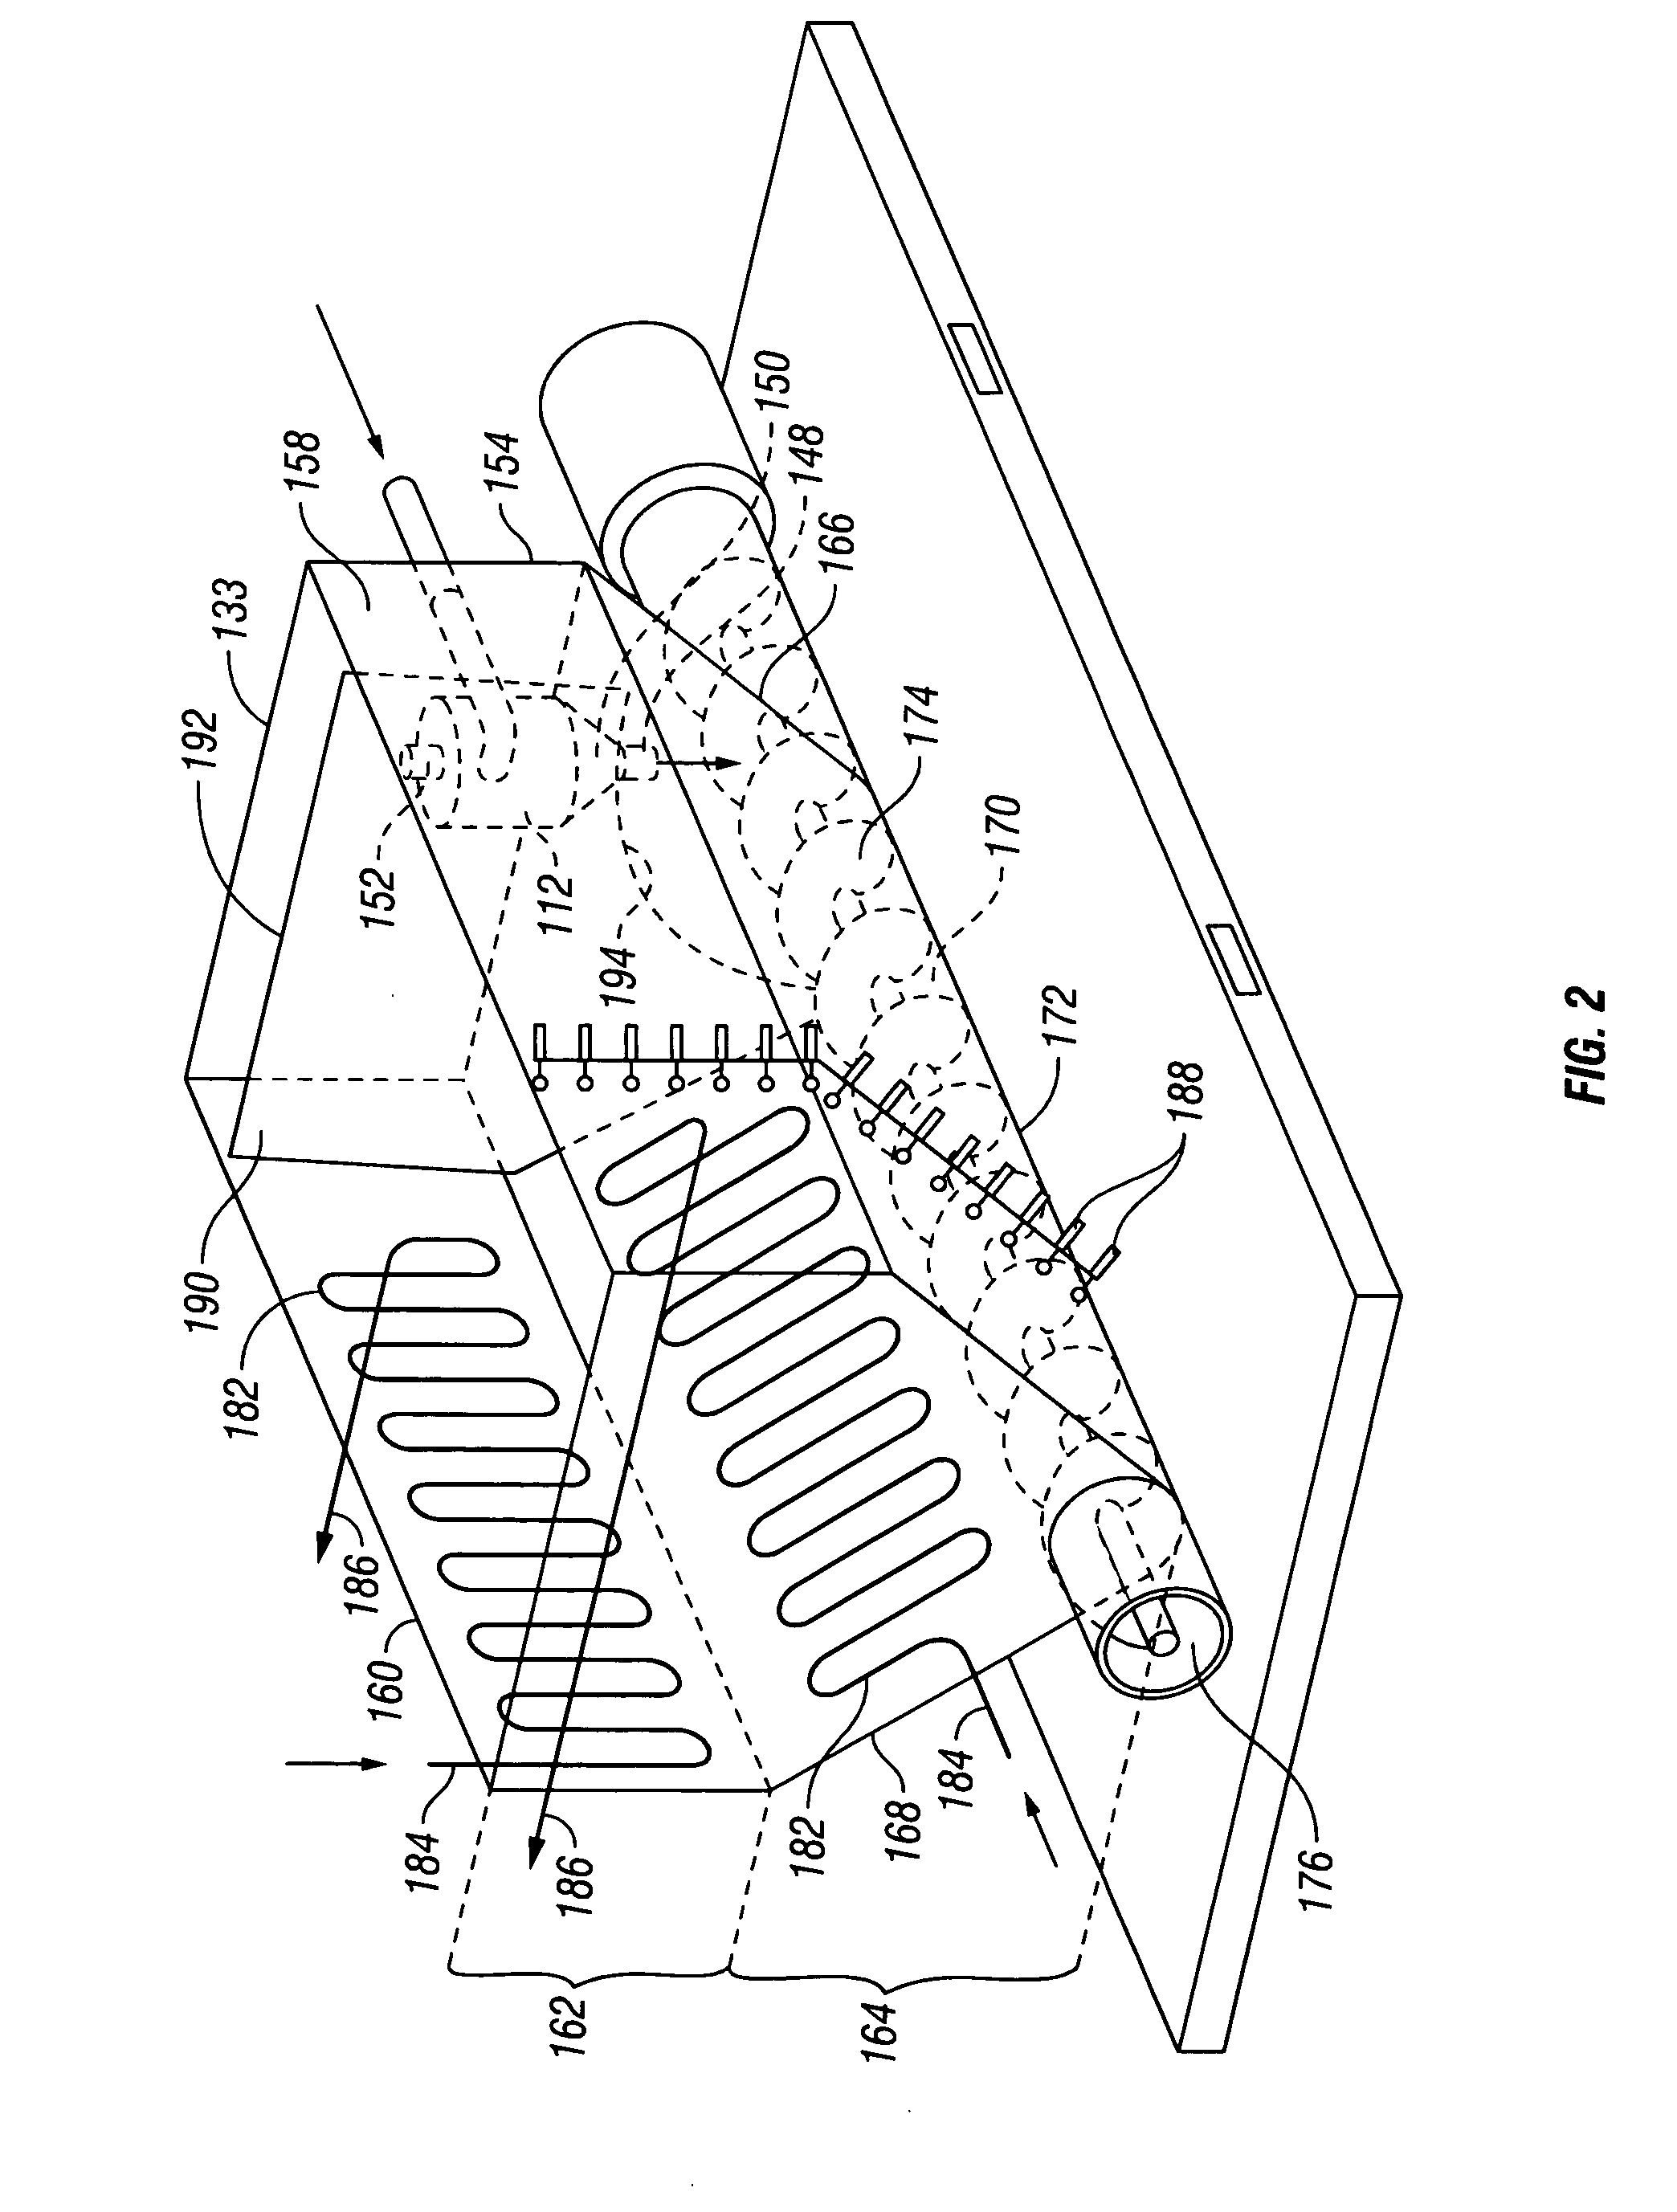 Oil-based sludge separation and treatment system